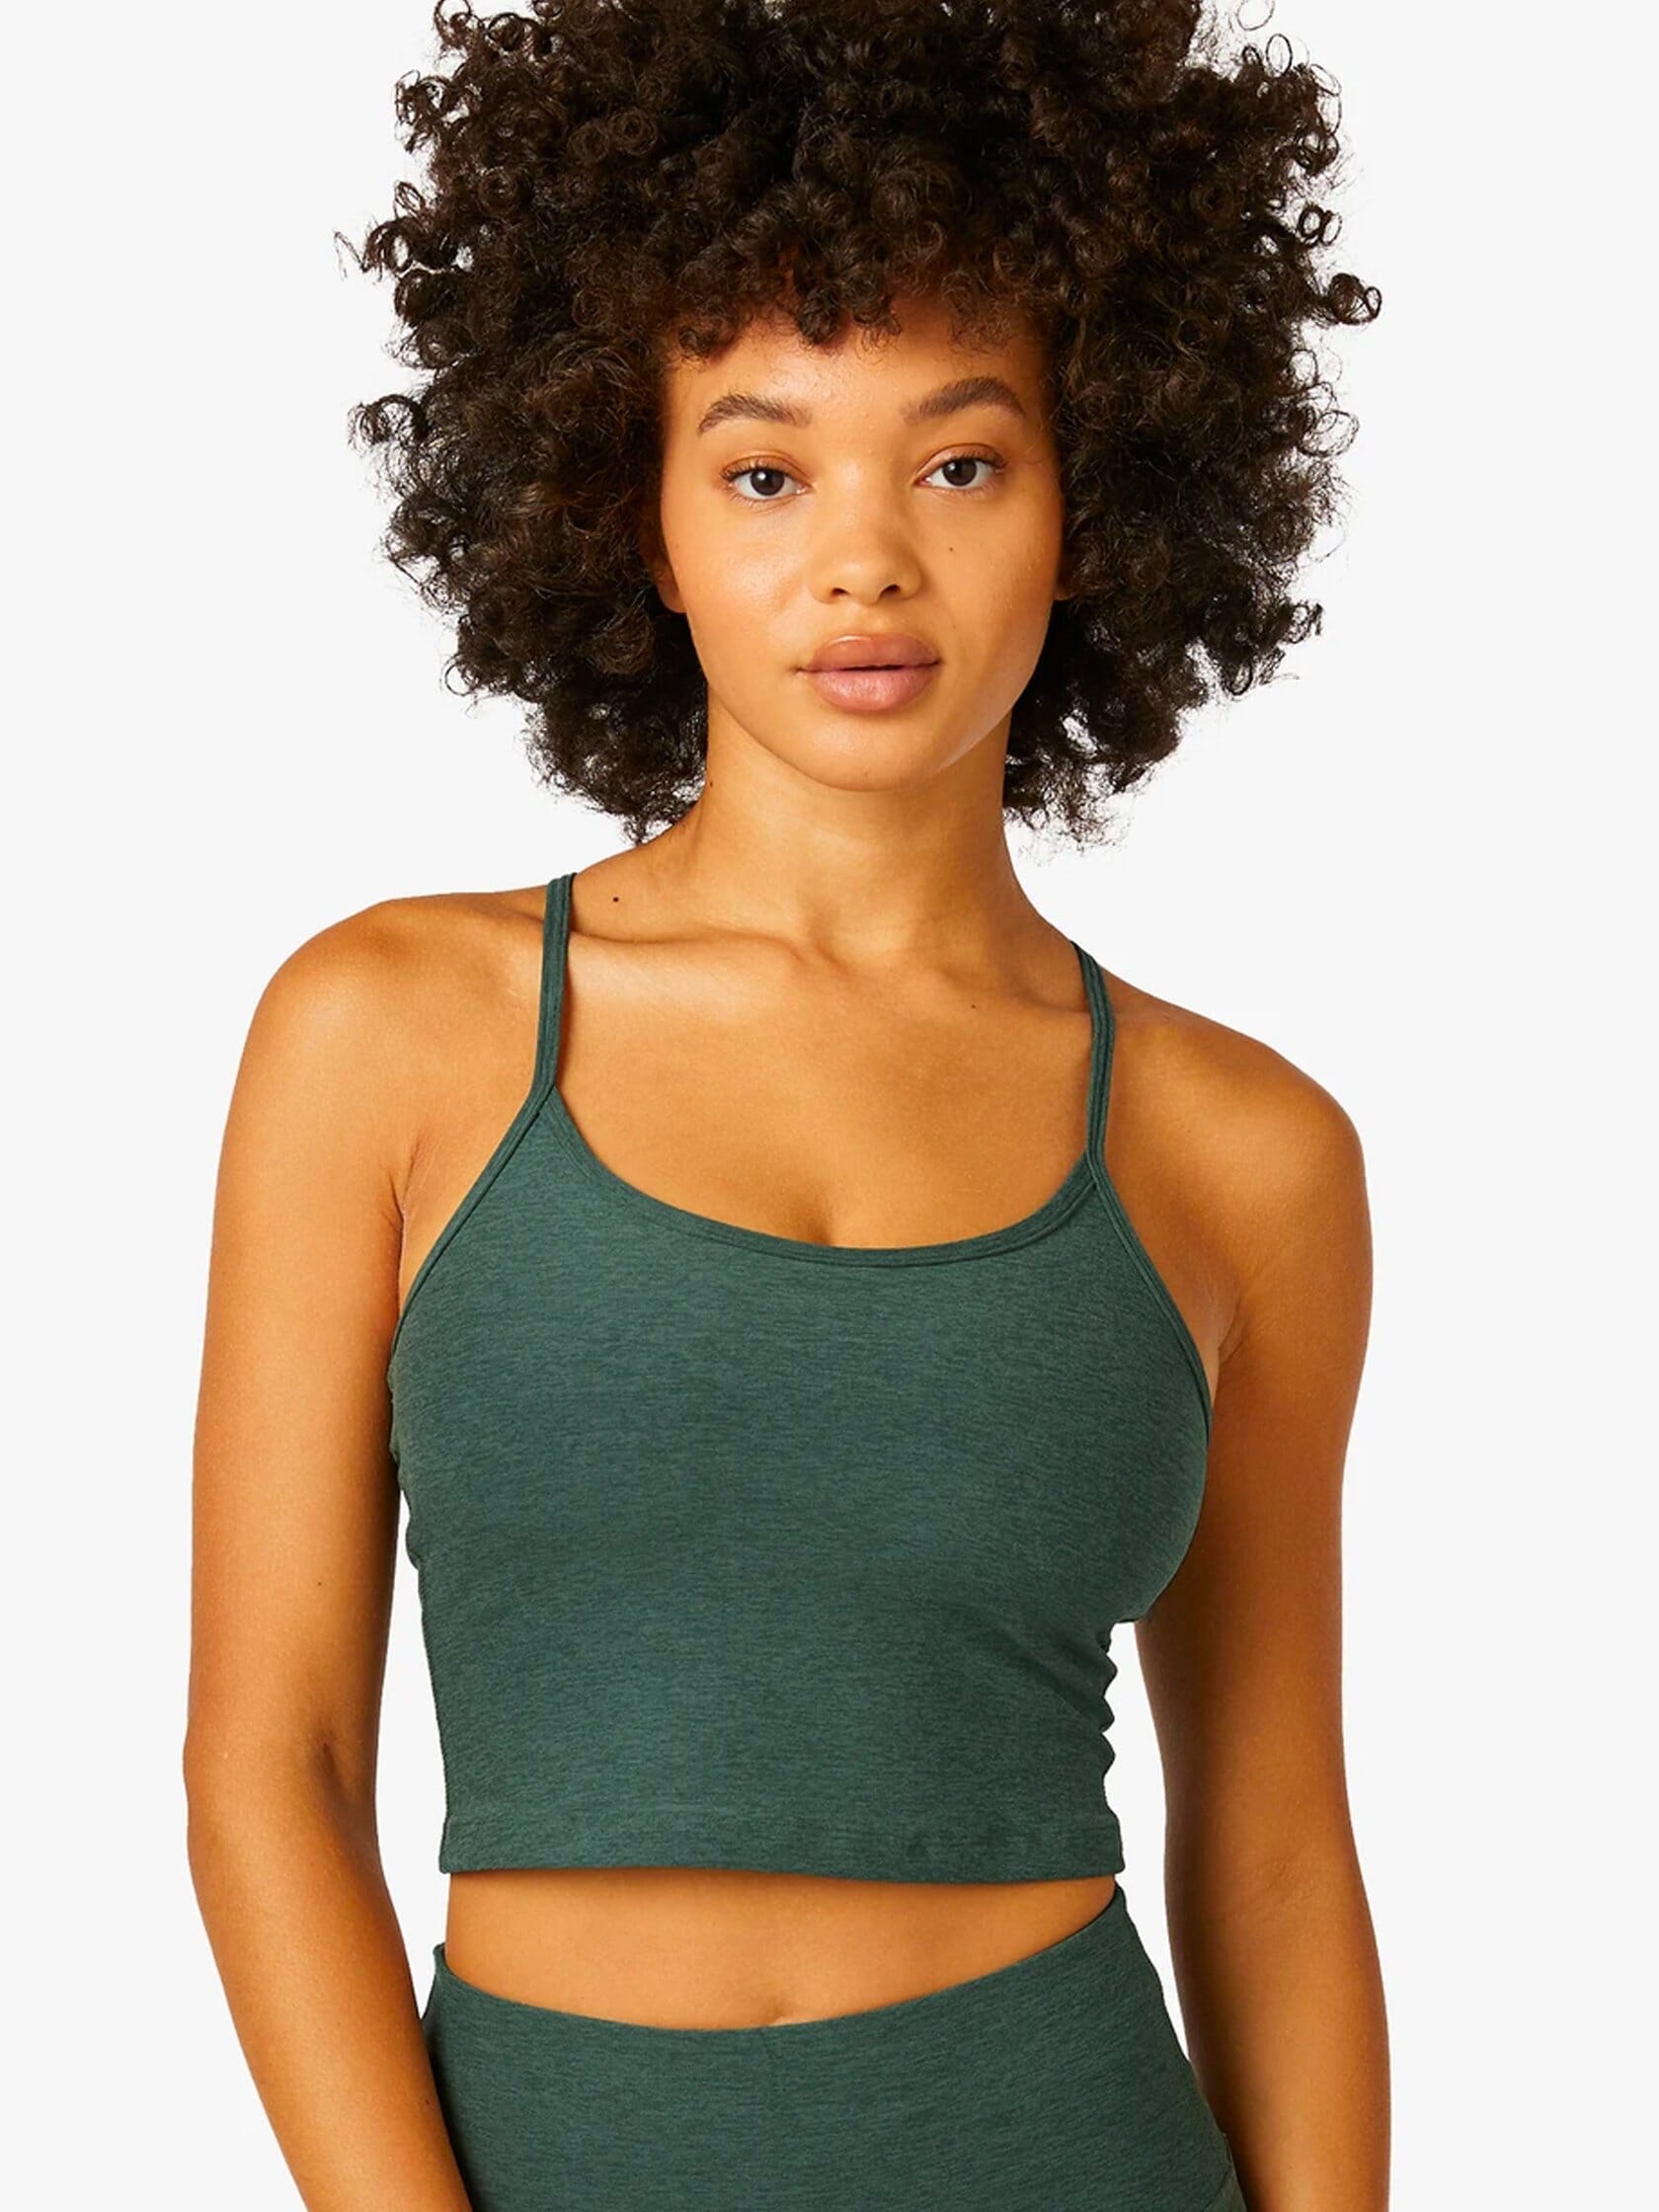 https://images.fashionpass.com/products/spacedye-slim-racerback-cropped-tank-2-beyond-yoga-green-ivy-42c-1.jpg?profile=a